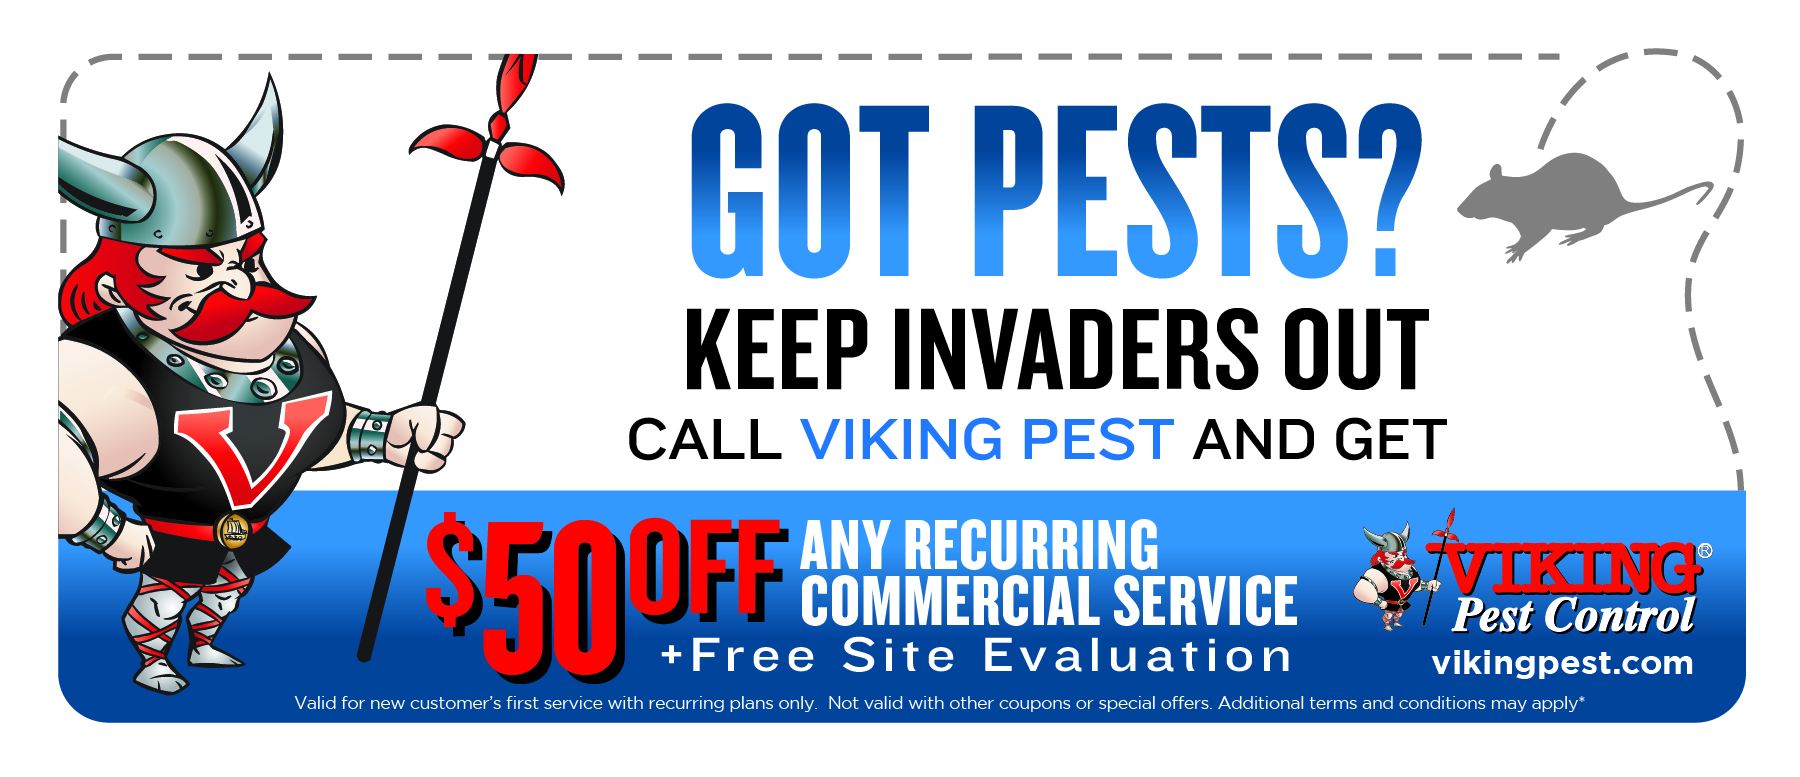 Save $50 on Commercial Pest Control Services